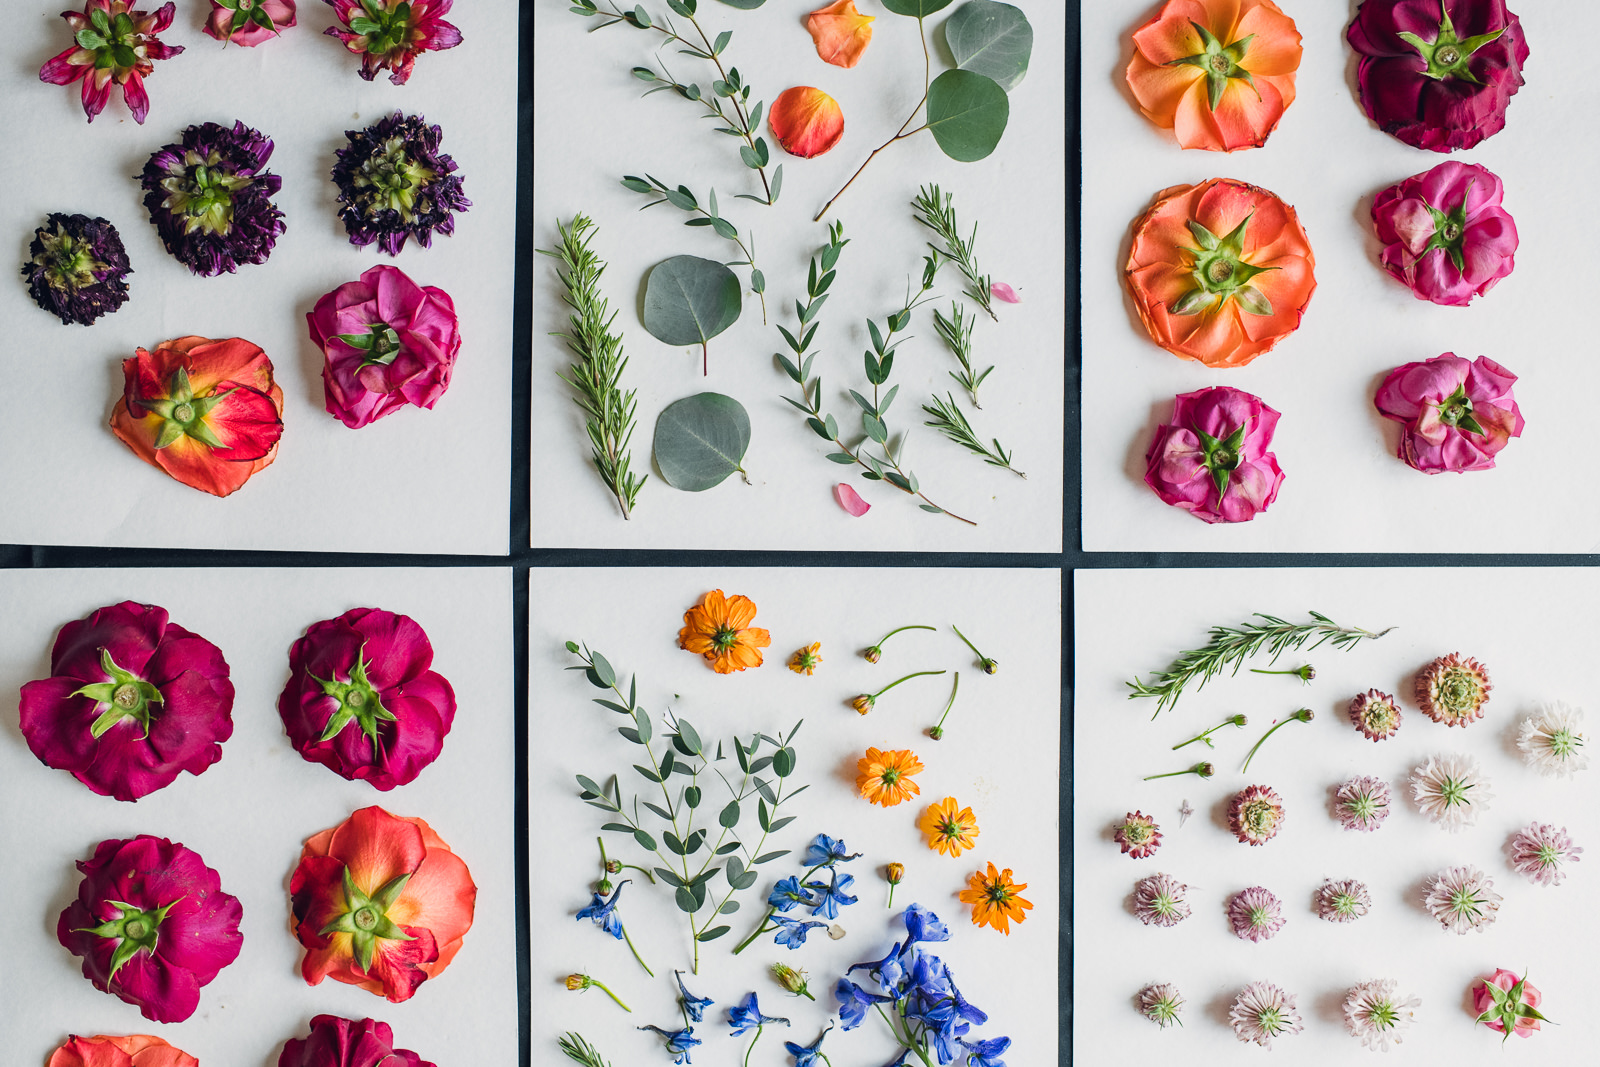 colorful flowers laid out ready to press for bouquet preservation